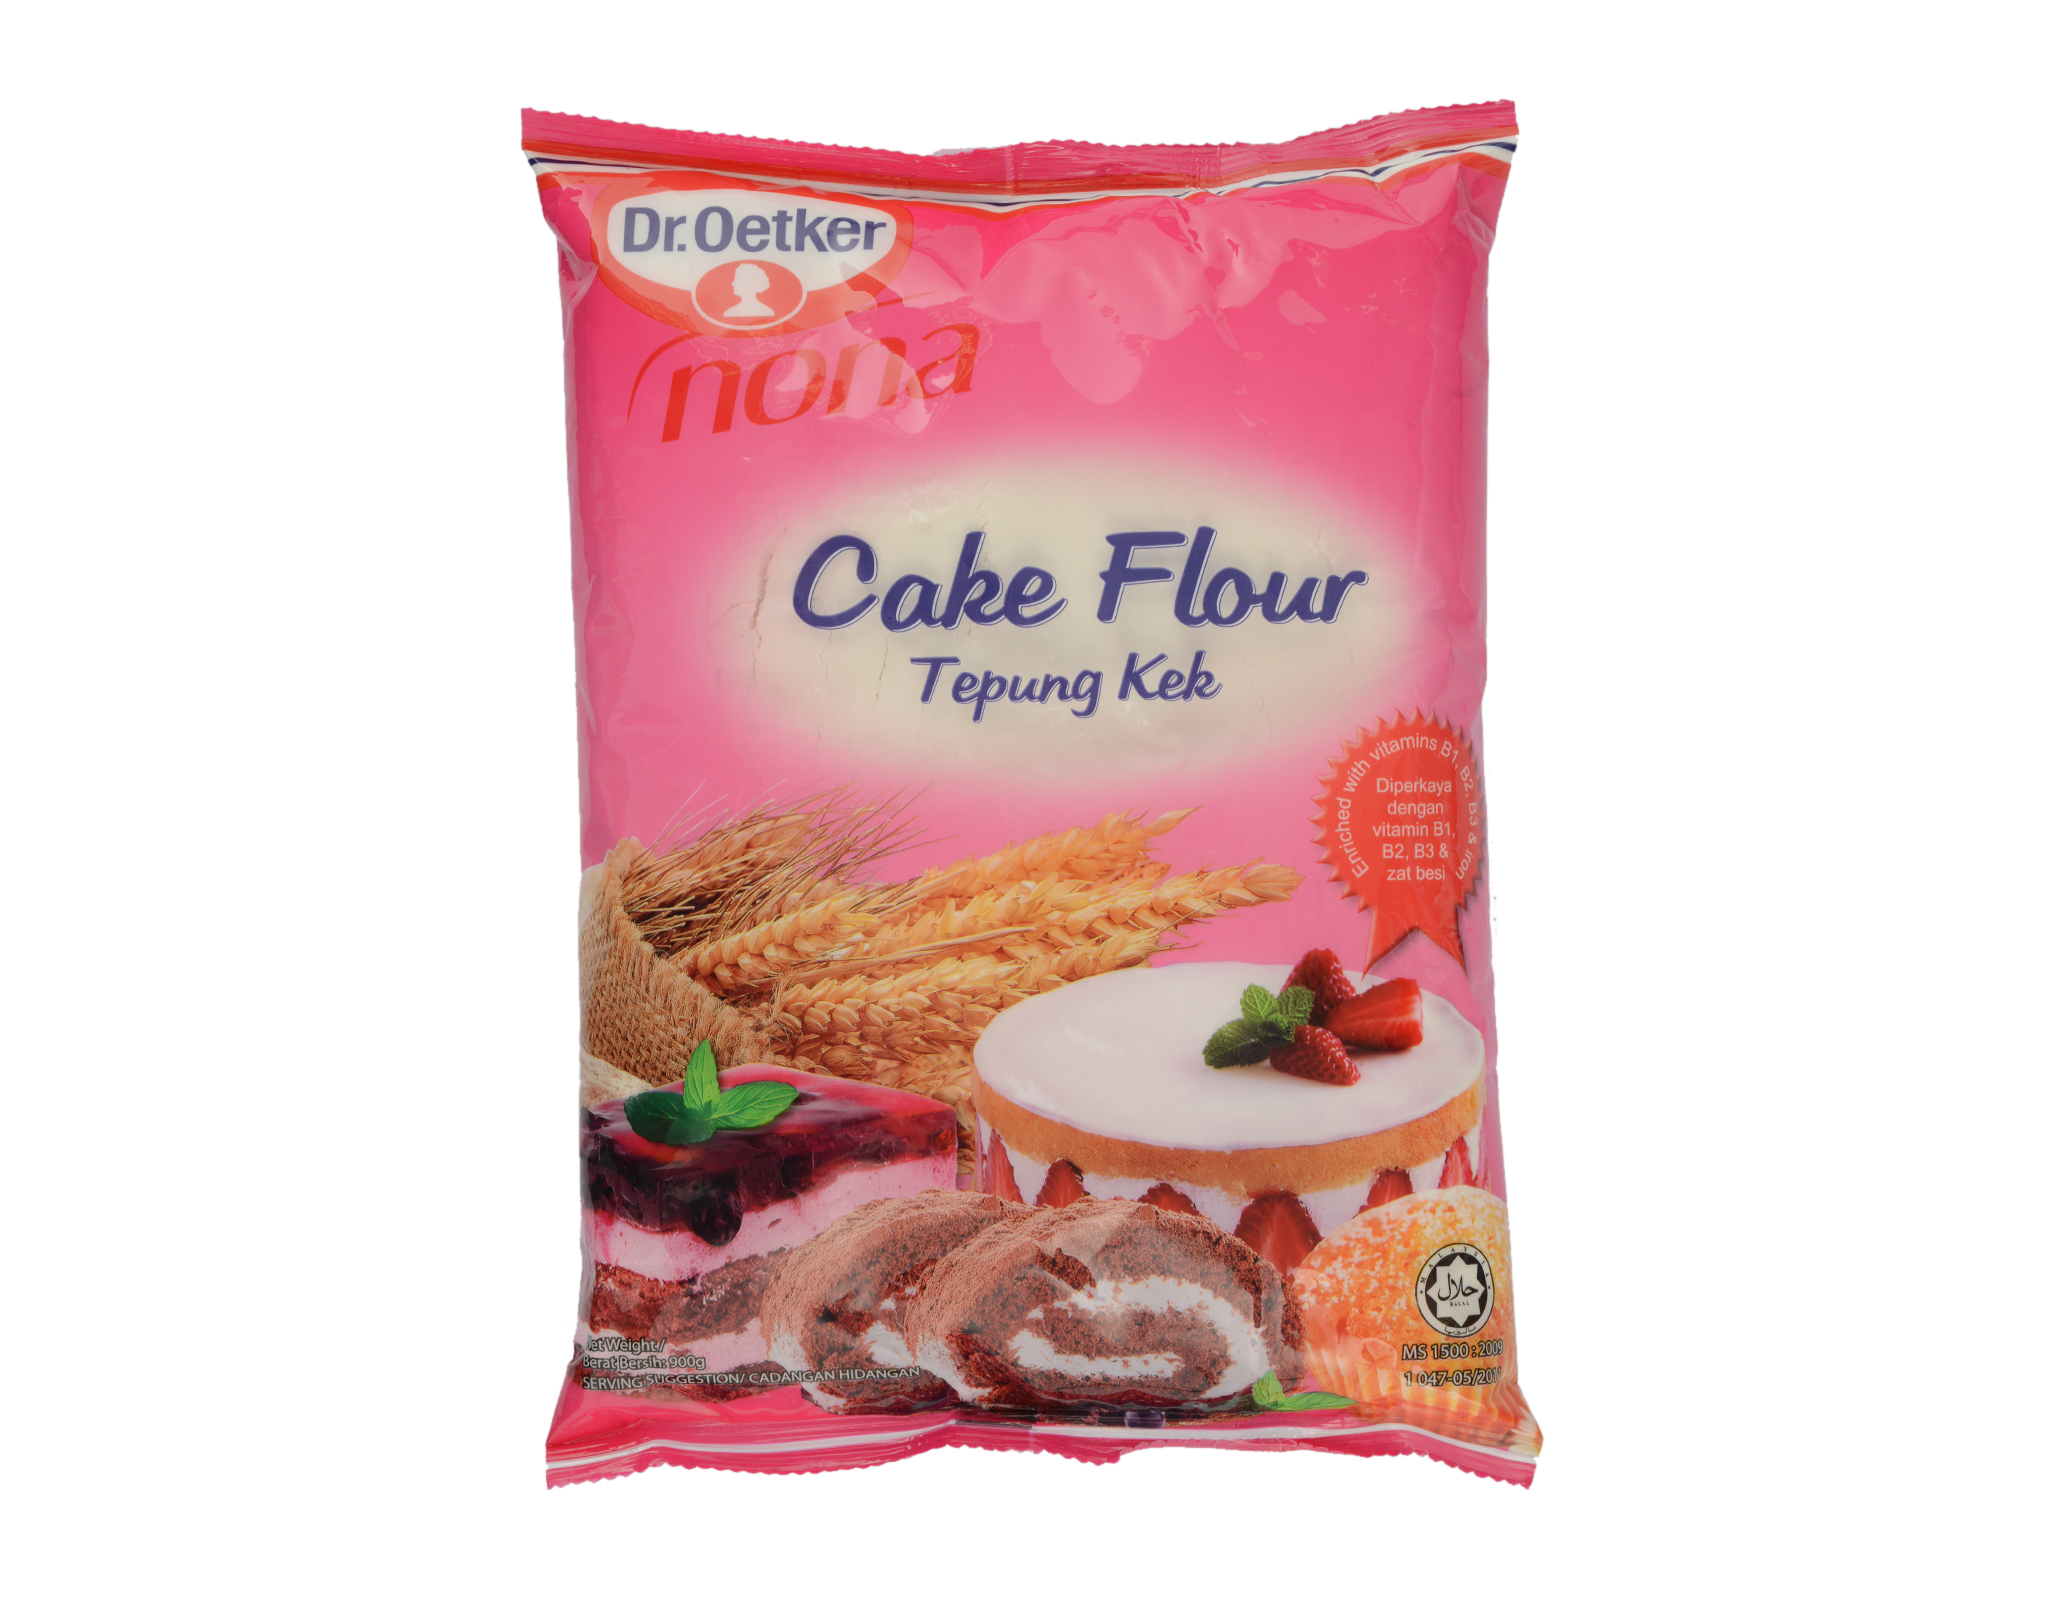 Baking Mixes - Product Range from Dr. Oetker Nona